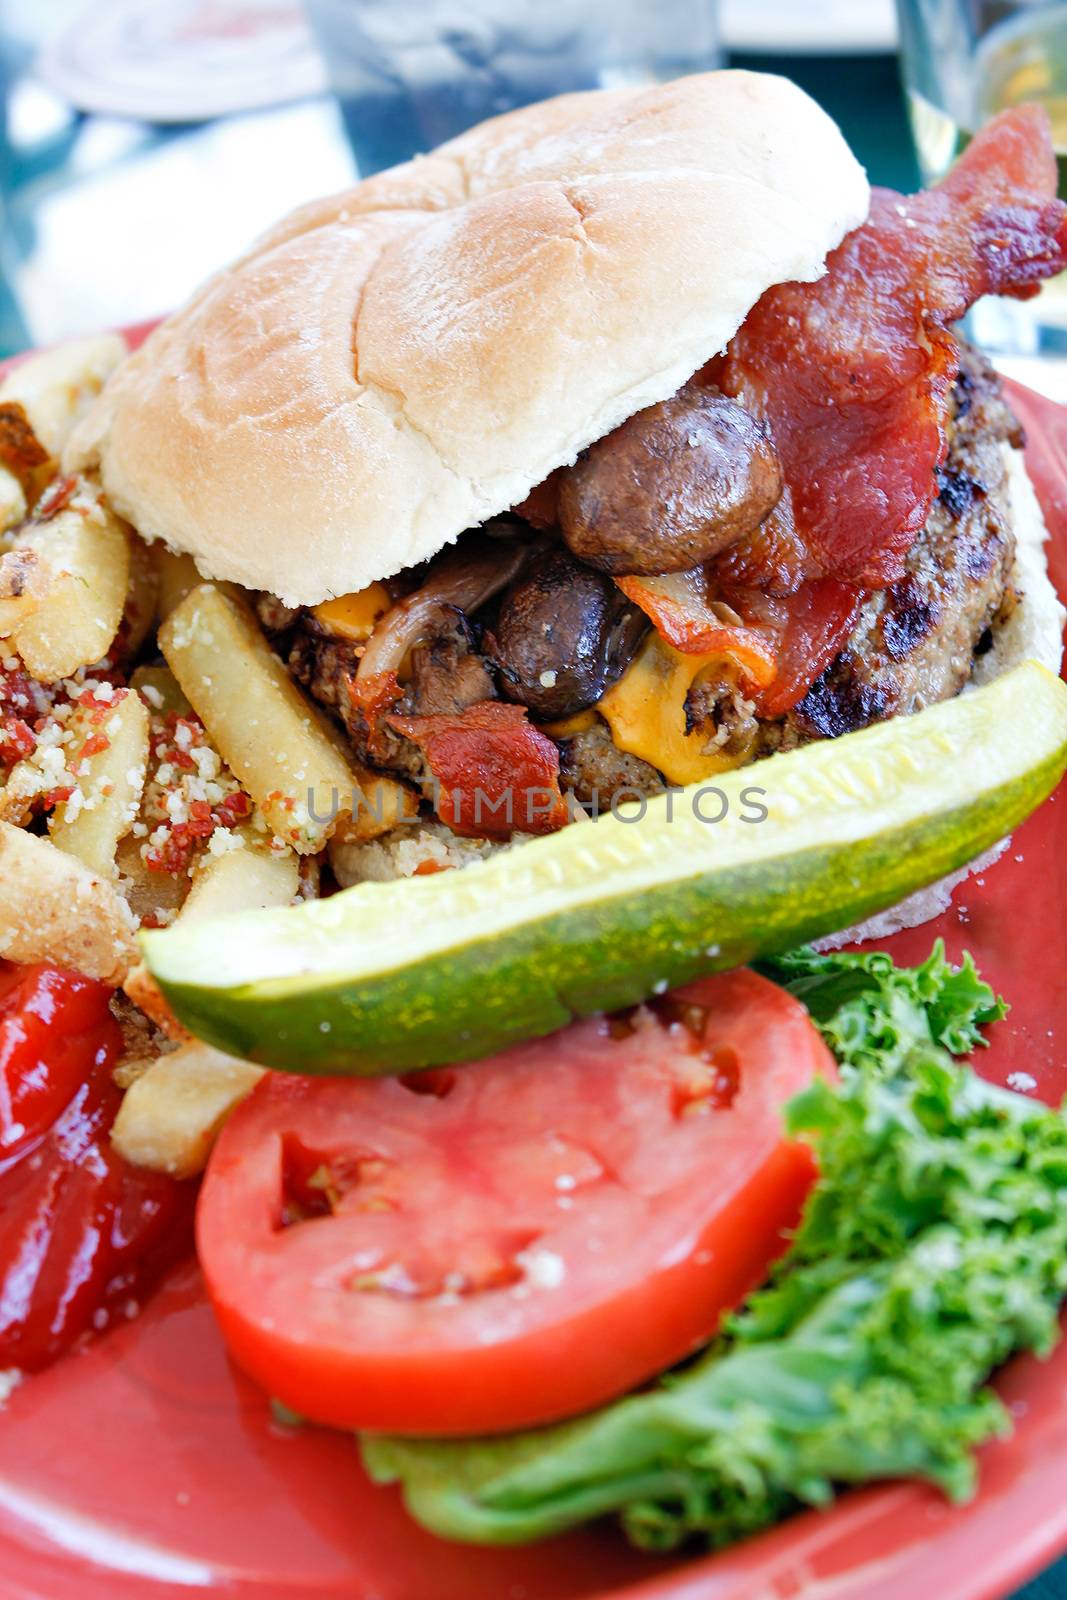 Gourmet Bacon Burger by graficallyminded